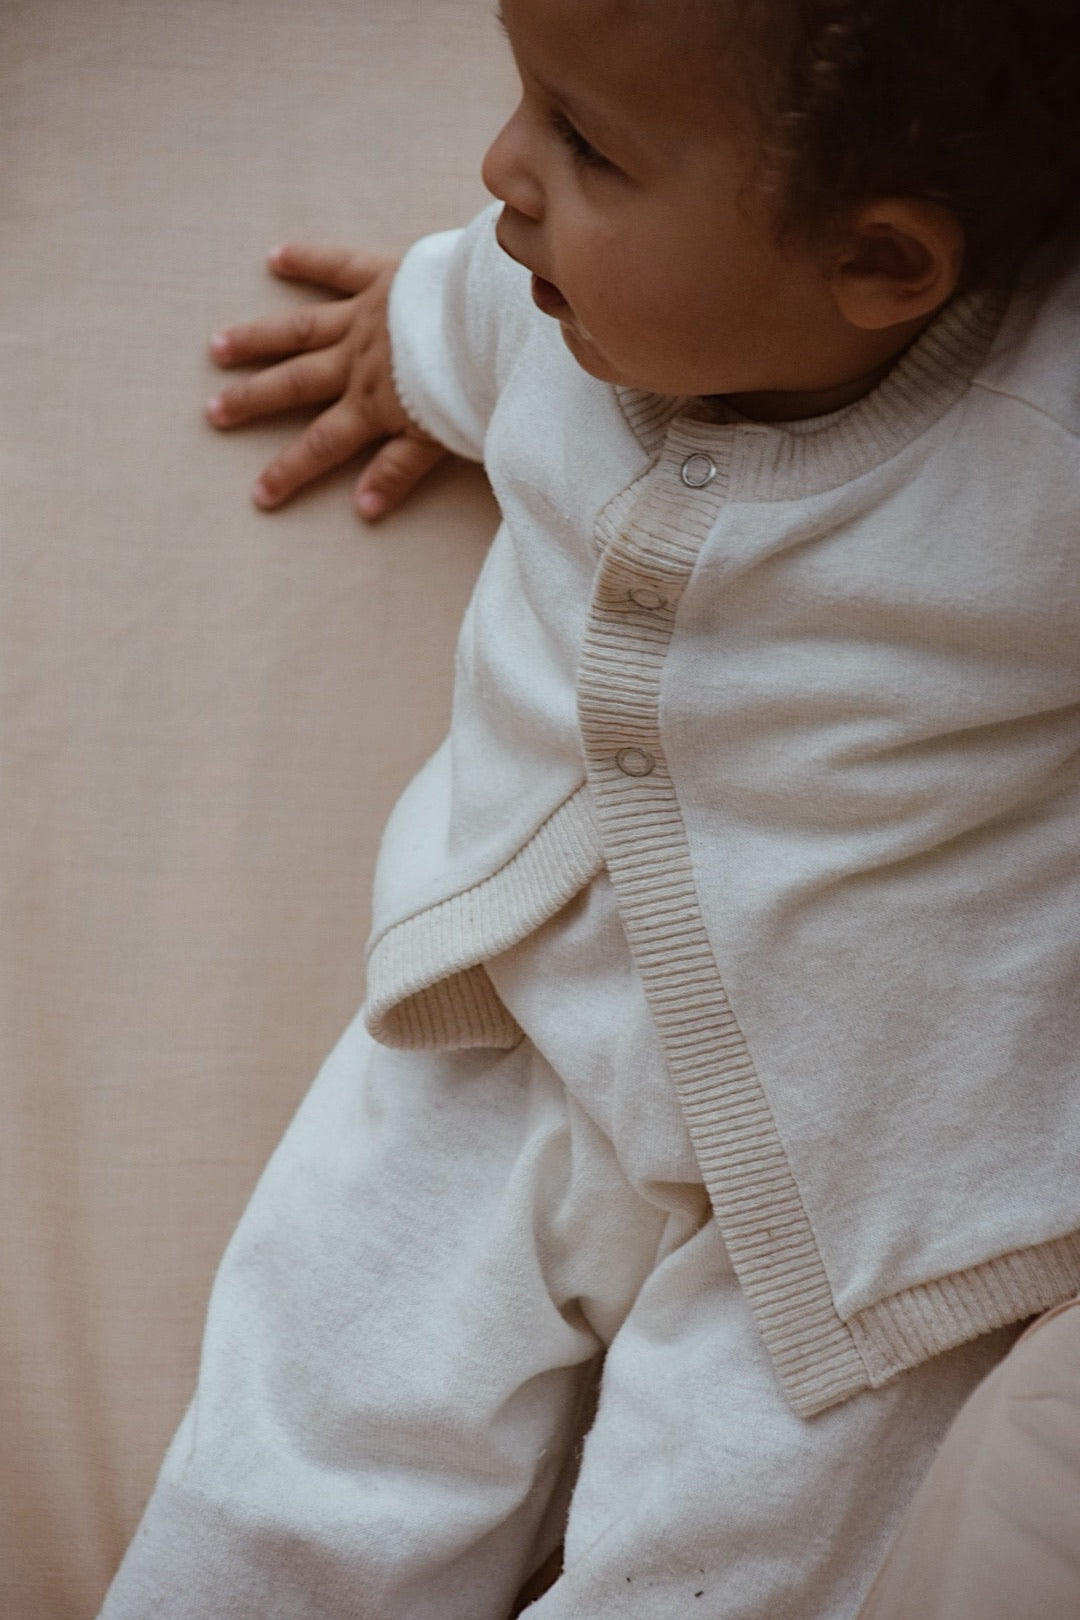 a unisex three-snap sweater with a boxy & slightly cropped. made of natural hemp/organic cotton French Terry with natural cotton 2x1 army rib. destined for heirloom status.ethically made with love, by calgary childrenswear company, cabane.